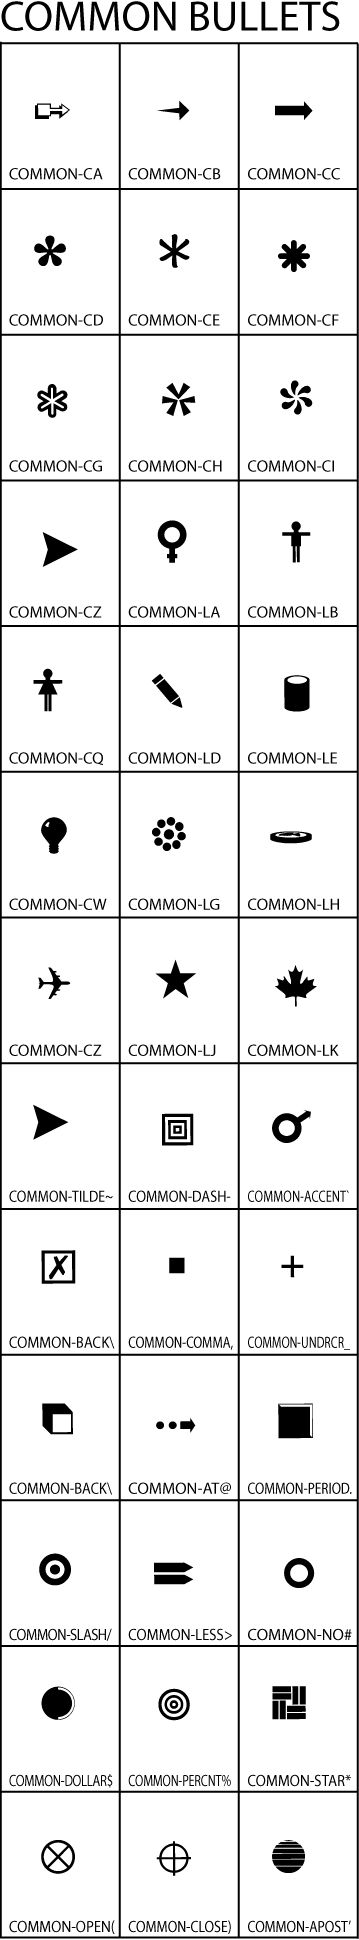 Common Bullets Clip-Art Gallery Chart